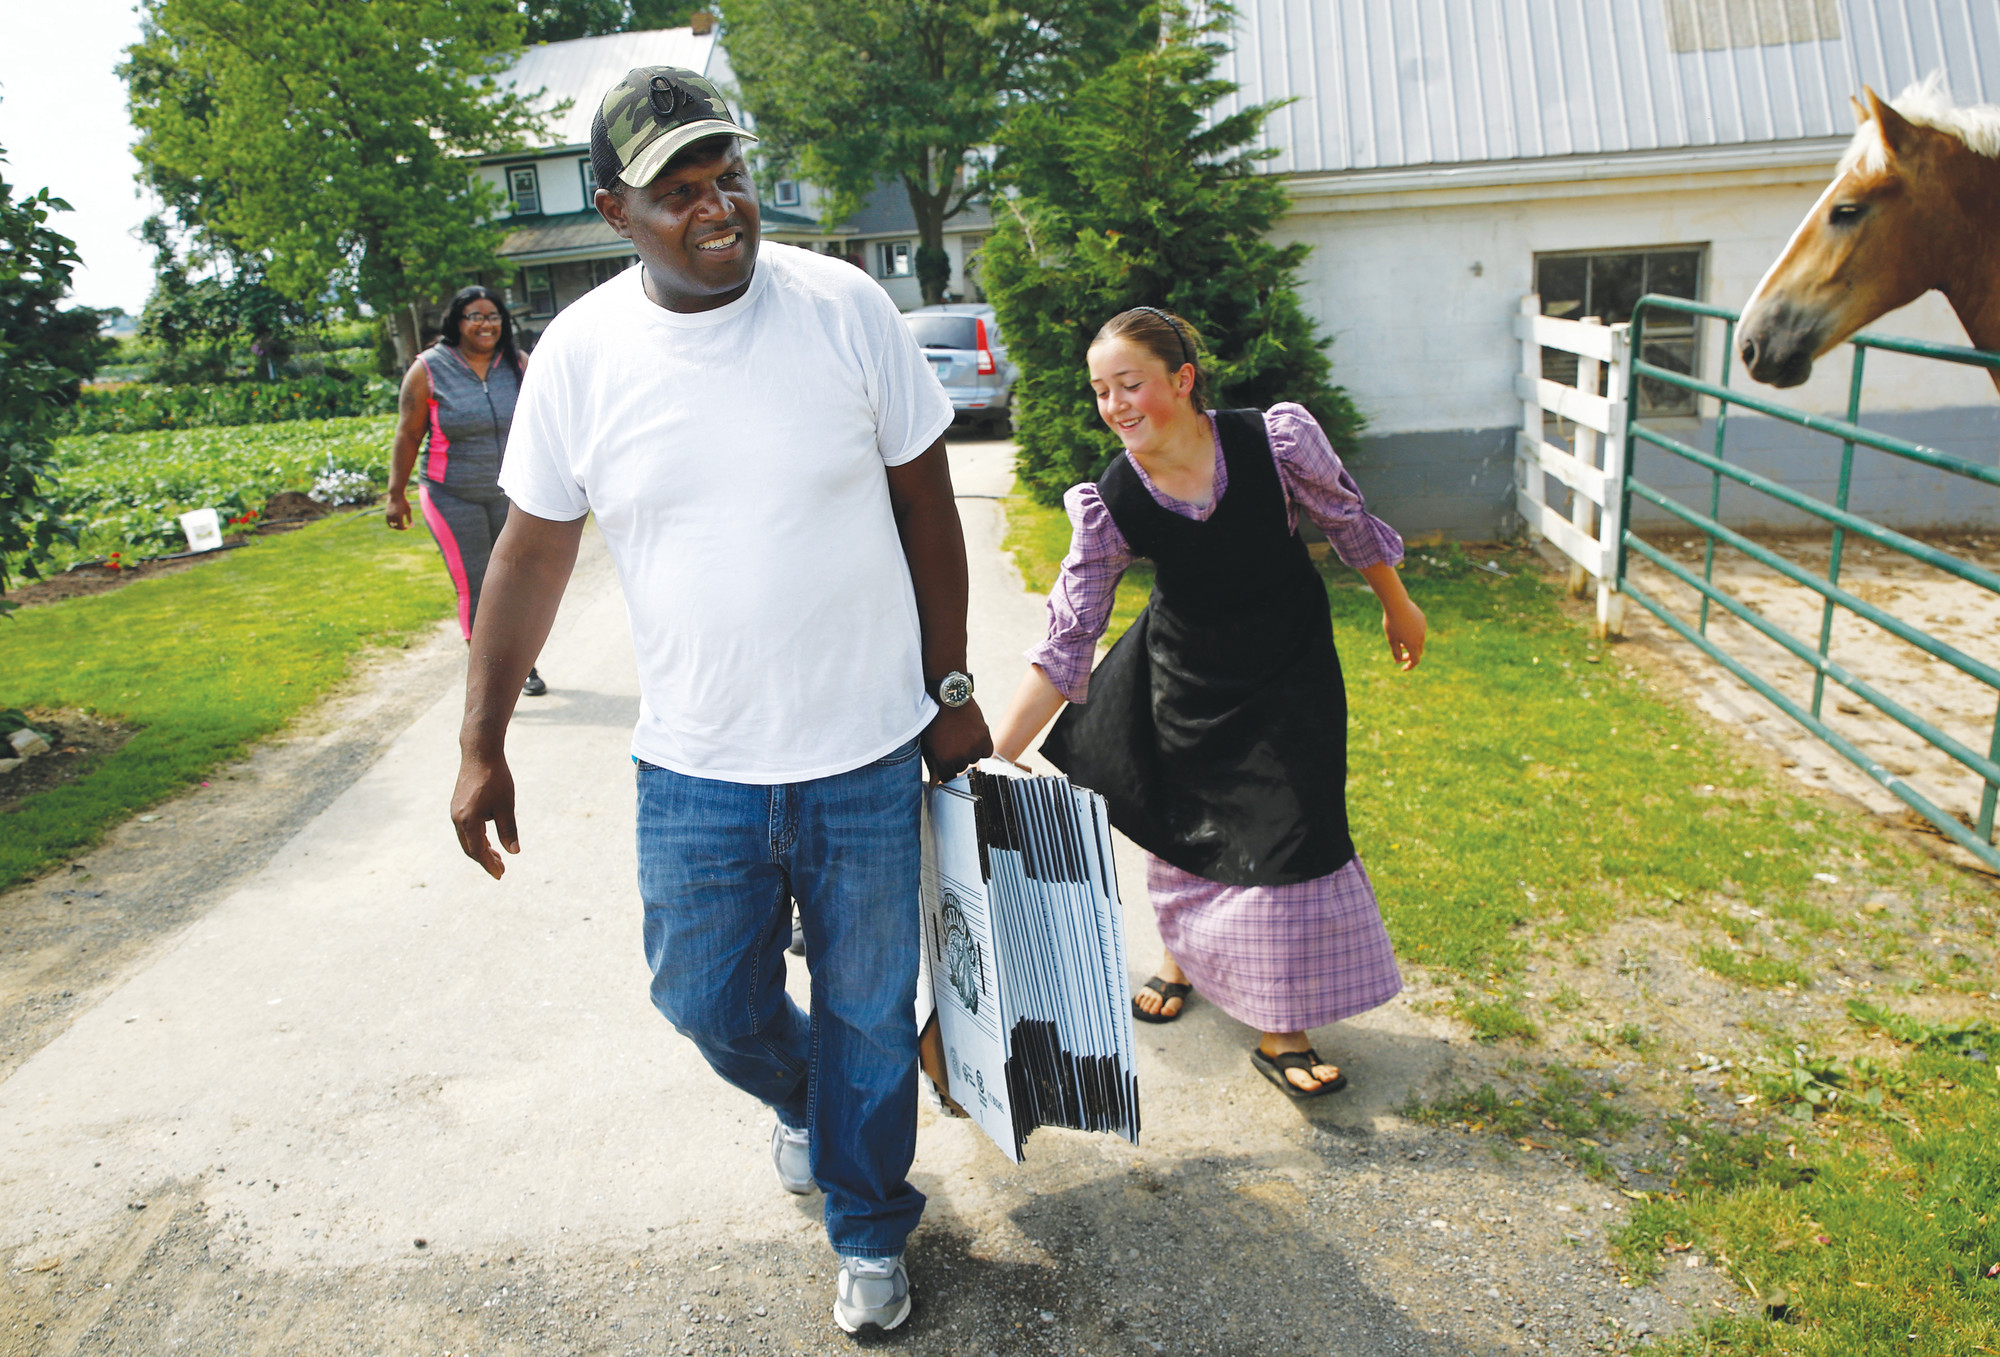 James Chase, left, the leader of a Baltimore arabber stable helps a daughter of an Old Order Mennonite family carry produce boxes at her family's farm in New Holland.